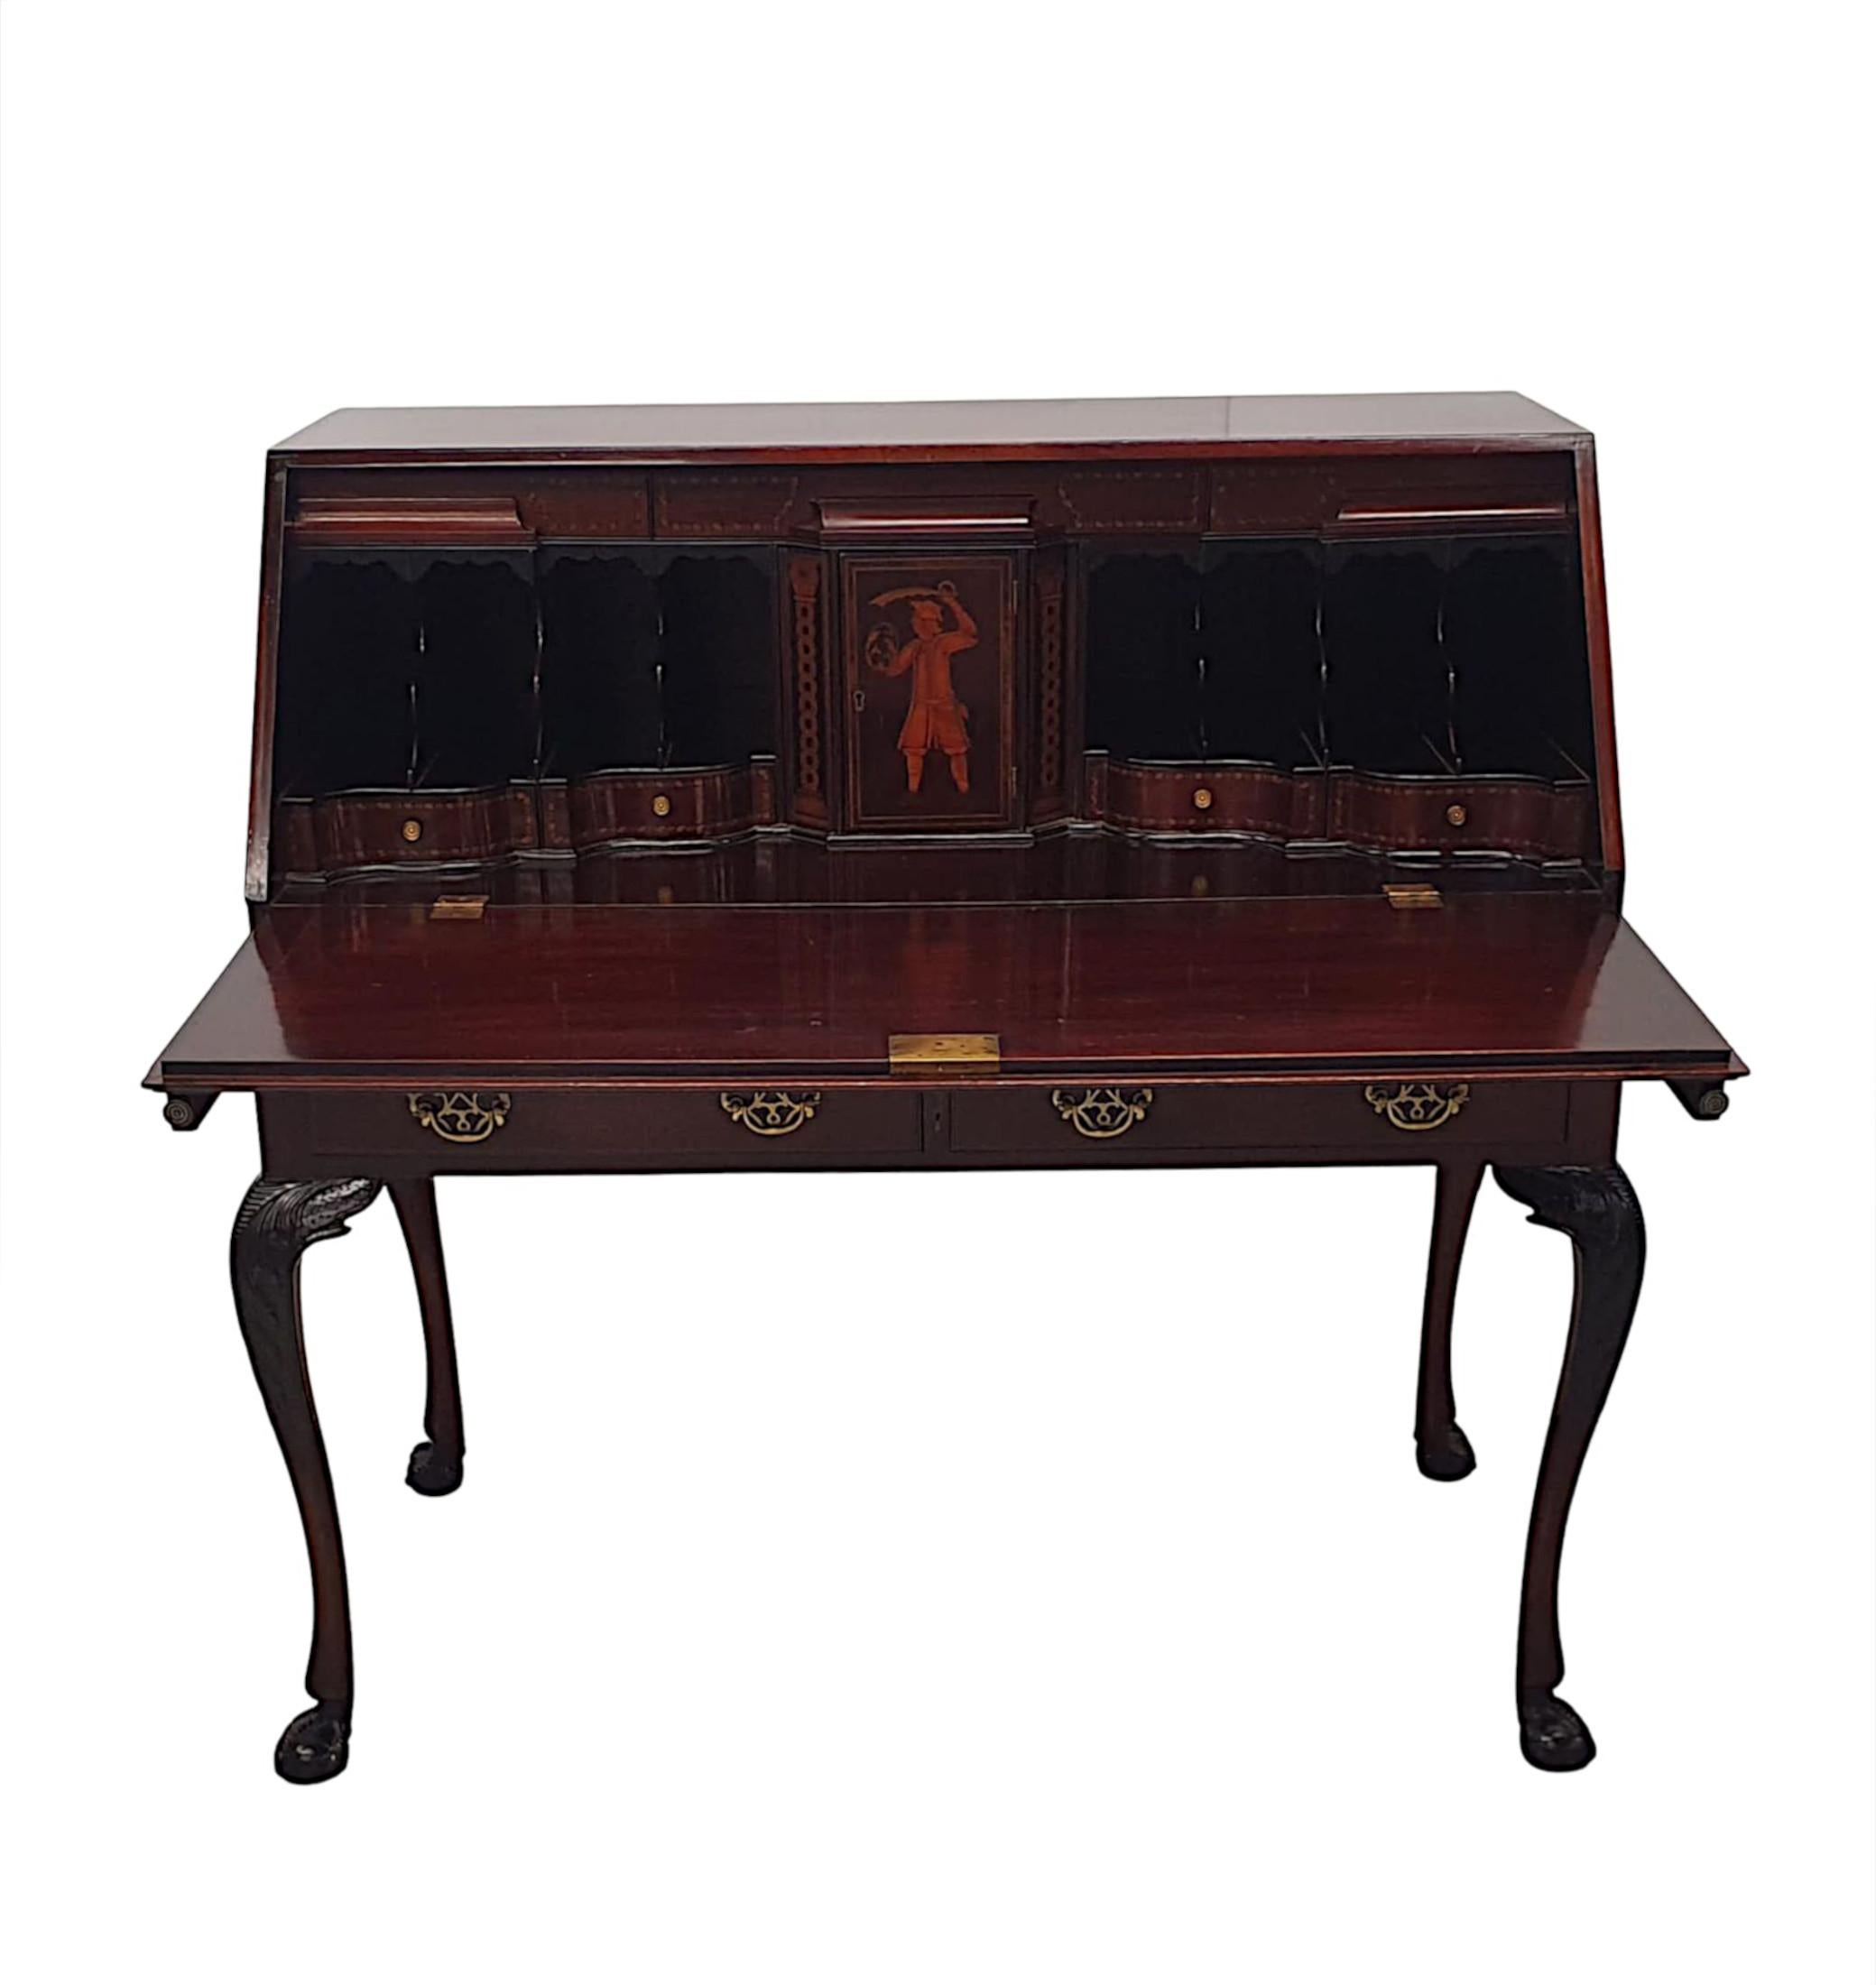 An exceptional 19th Century Irish, finely carved and richly patinated mahogany fall front bureau by Butler of Dublin.  The moulded fall front opens forwards revealing a writing surface which rests on two pull out slide supports and a fitted interior